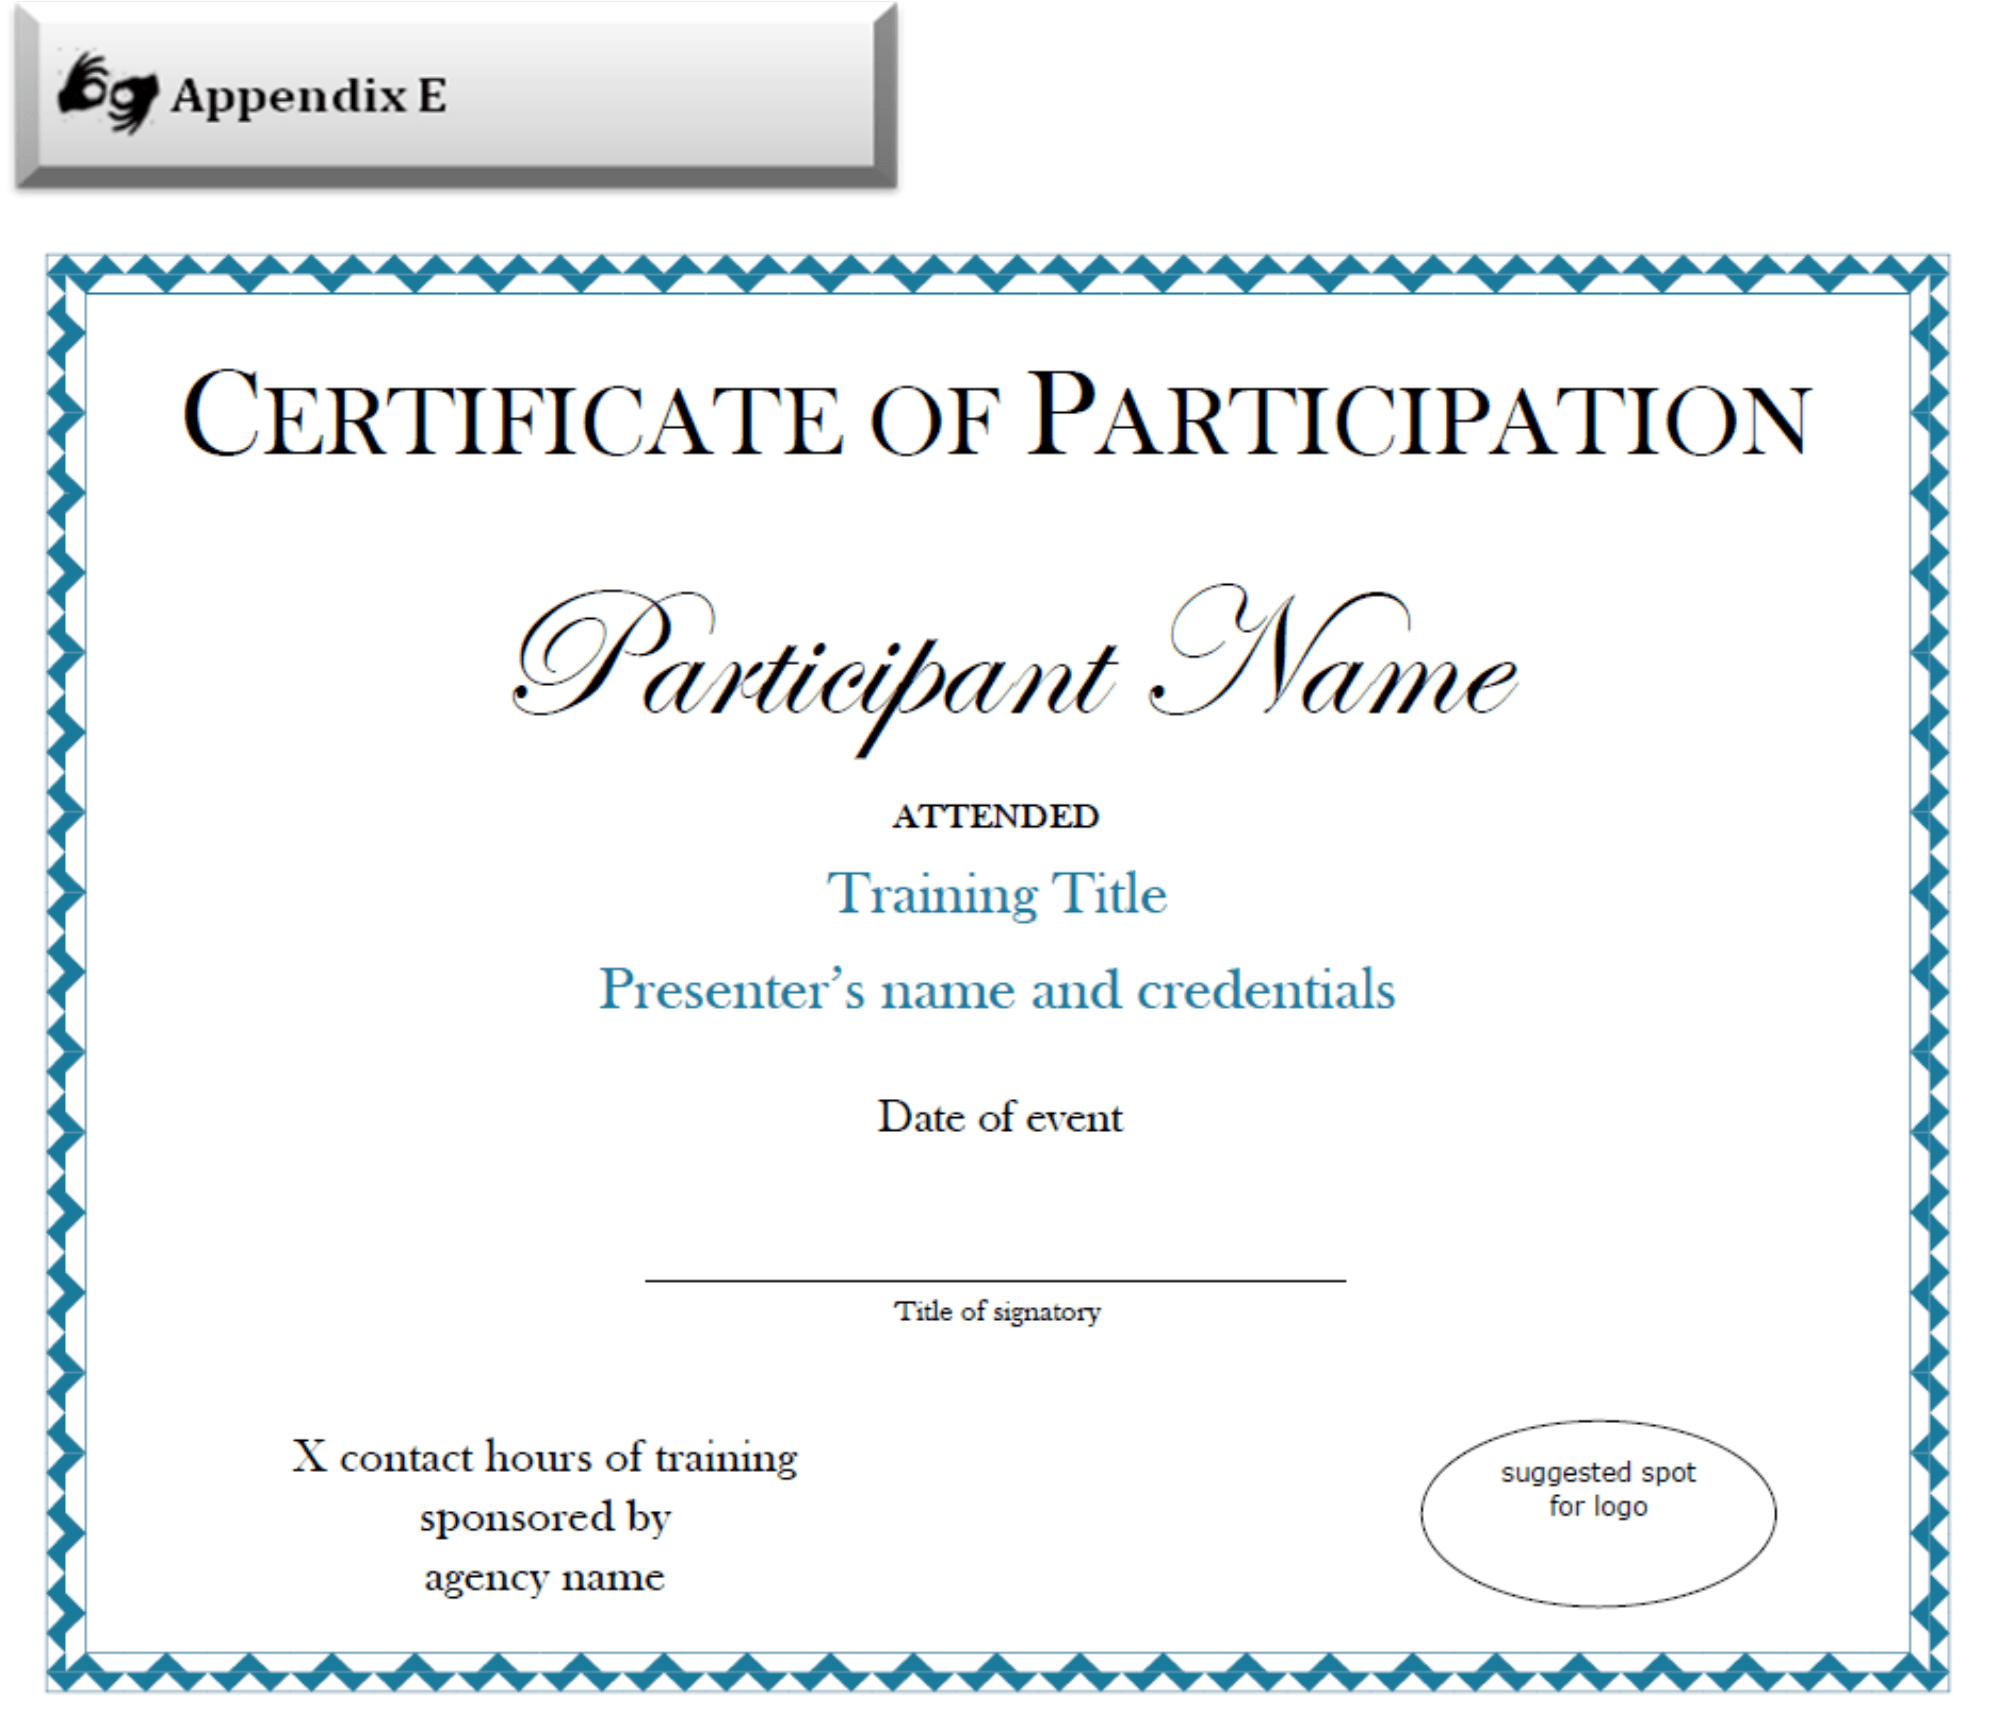 Participation Certificate Template Free Download | Sample Intended For Participation Certificate Templates Free Download